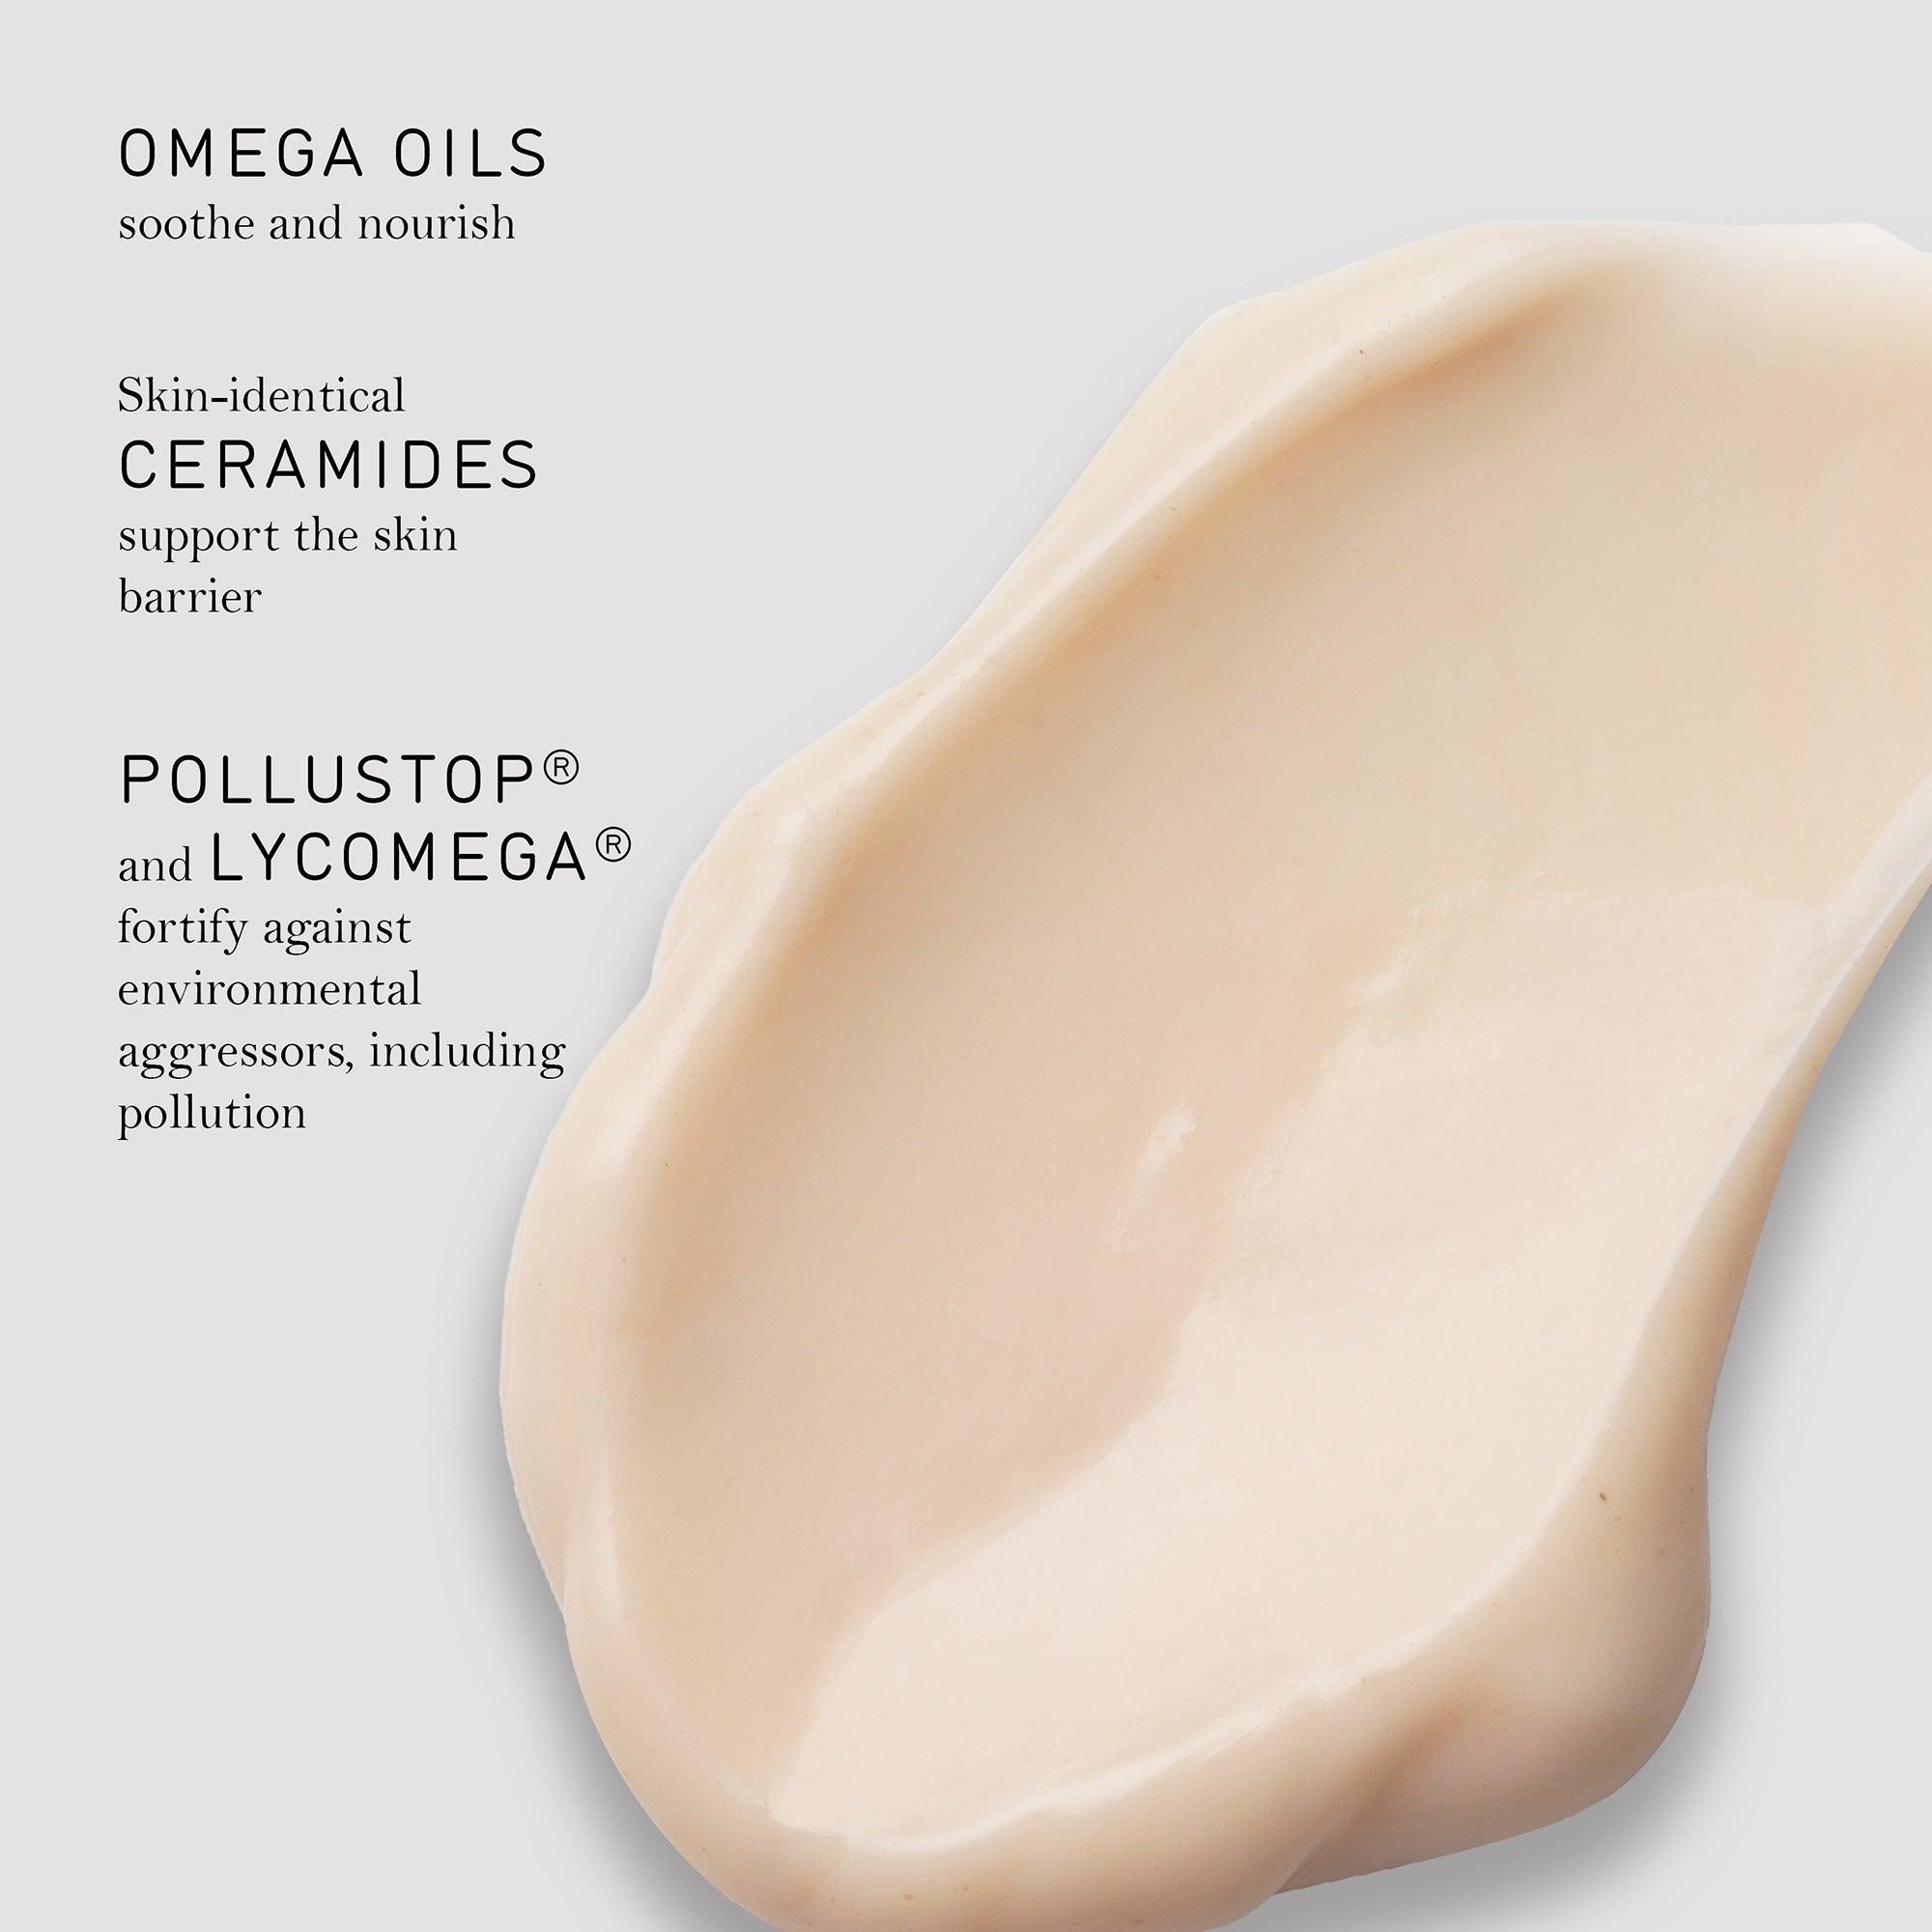 Sarah Chapman Skinesis Comfort Cream D-Stress Key ingredients with product swatch including Omega oils and ceramides